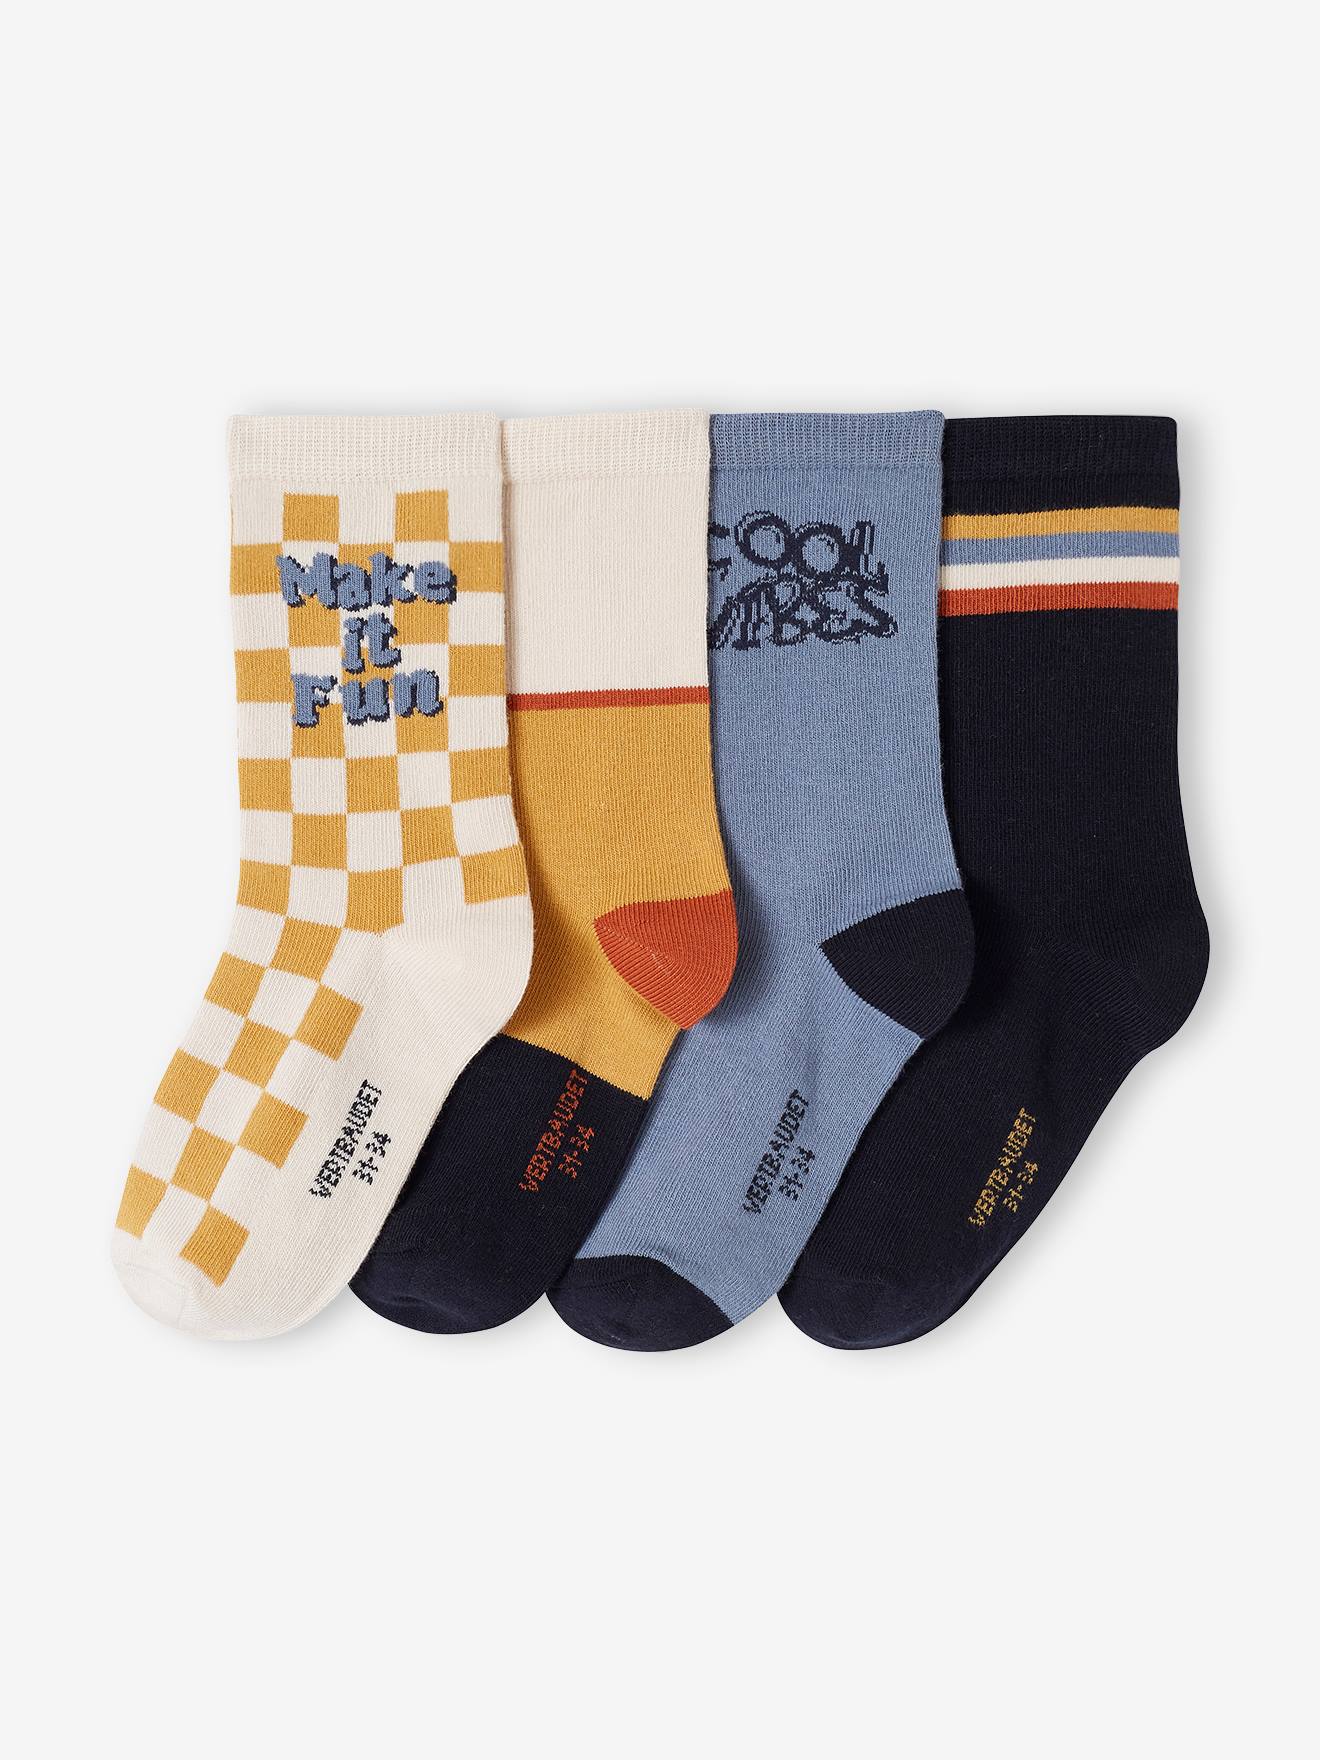 Pack of 4 Pairs of "Vintage" Socks for Boys turquoise